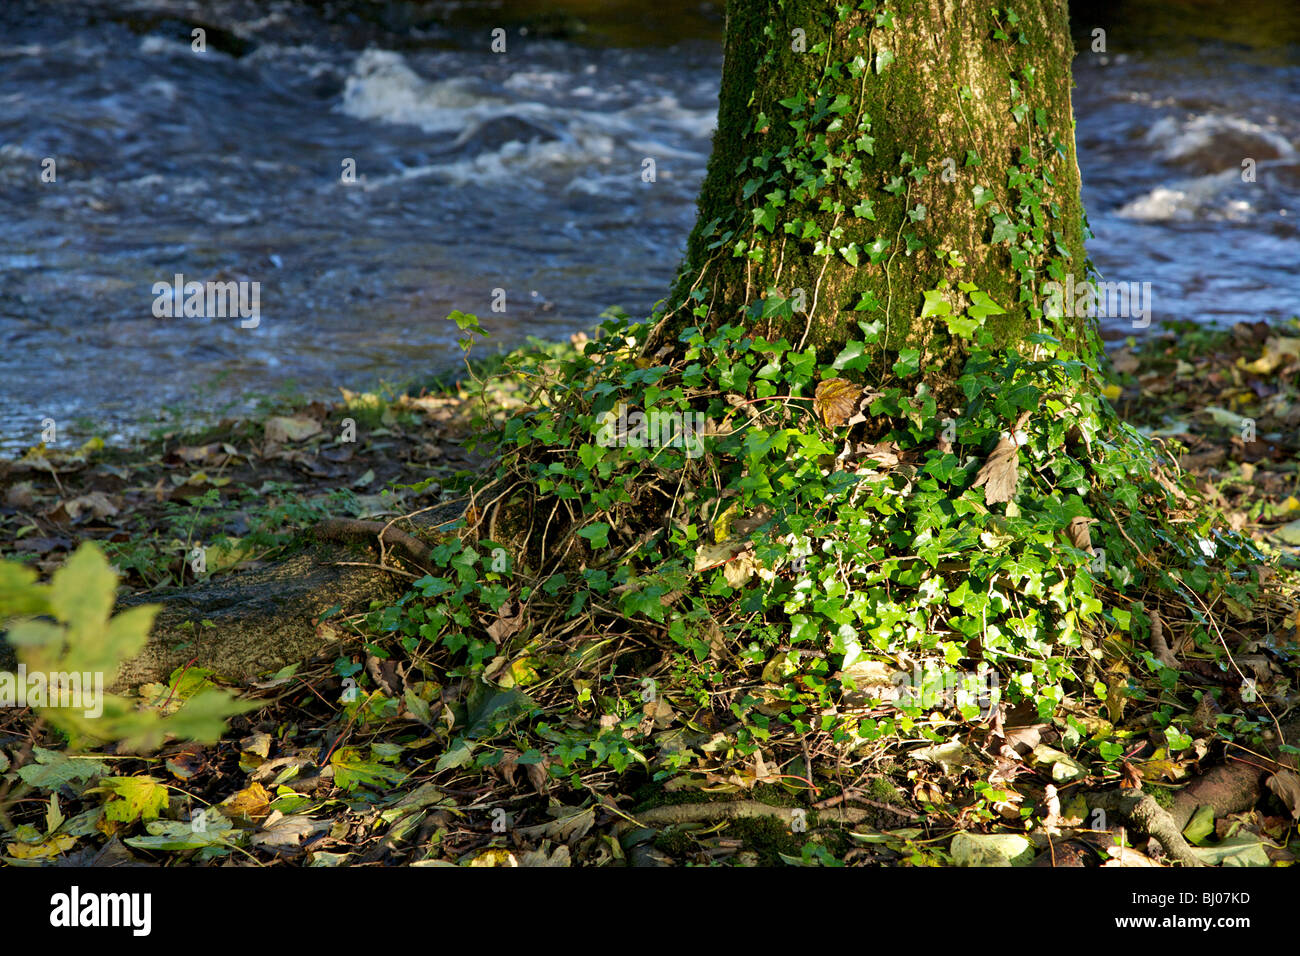 base of tree covered in ivy, with swift running river in background Stock Photo